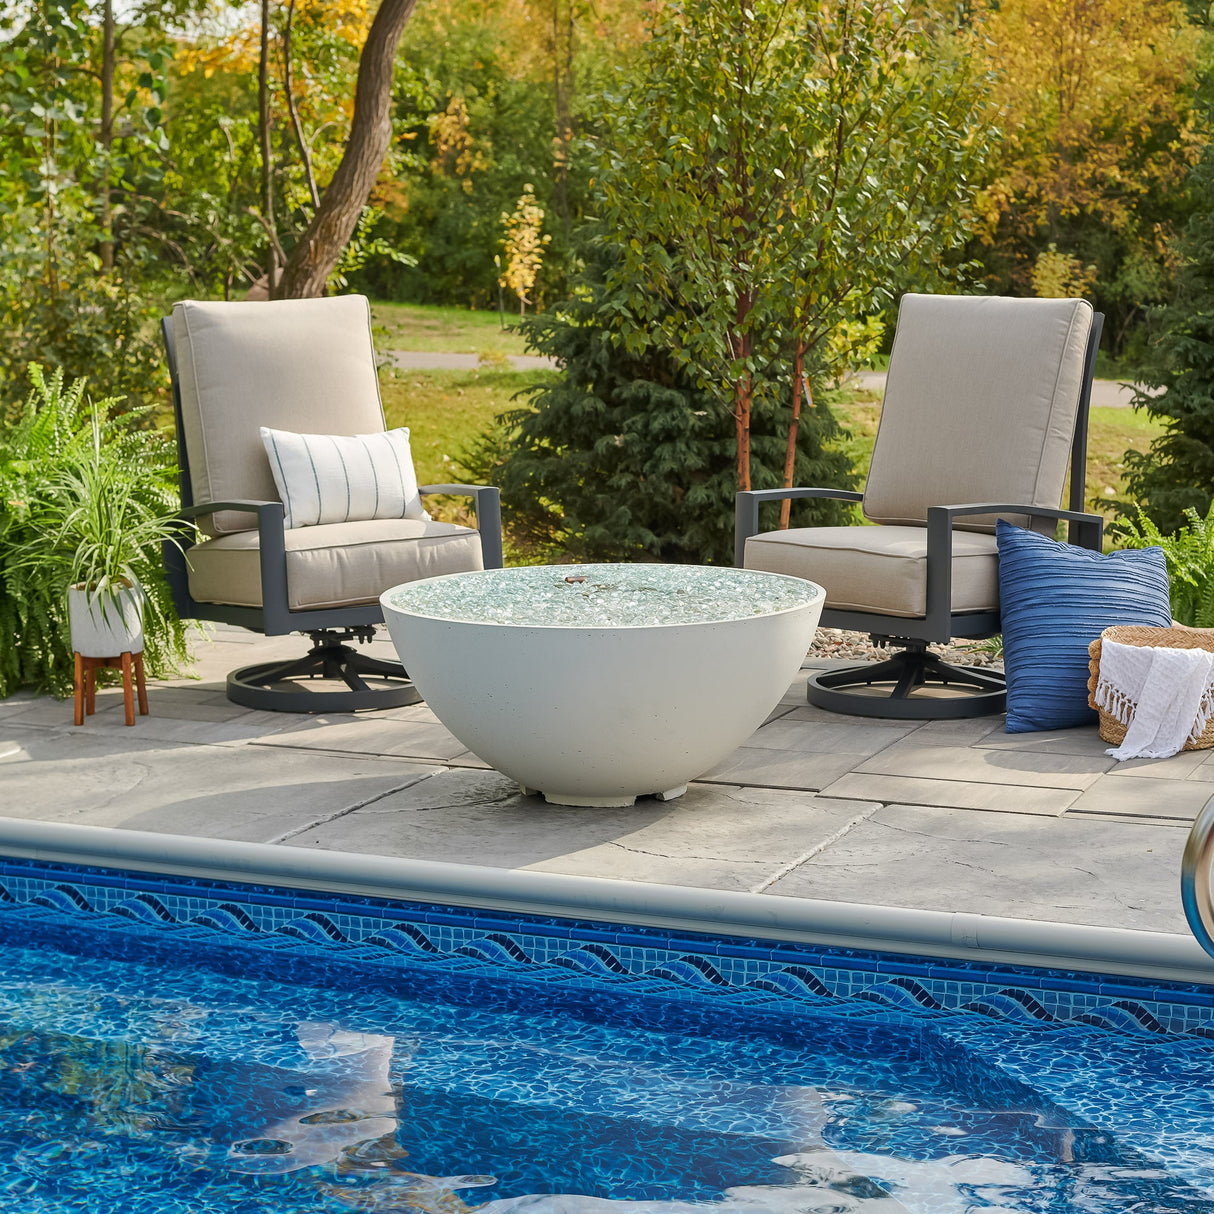 A White Cove Edge Round Gas Fire Pit Bowl 42" next to a pool in a scenic backyard